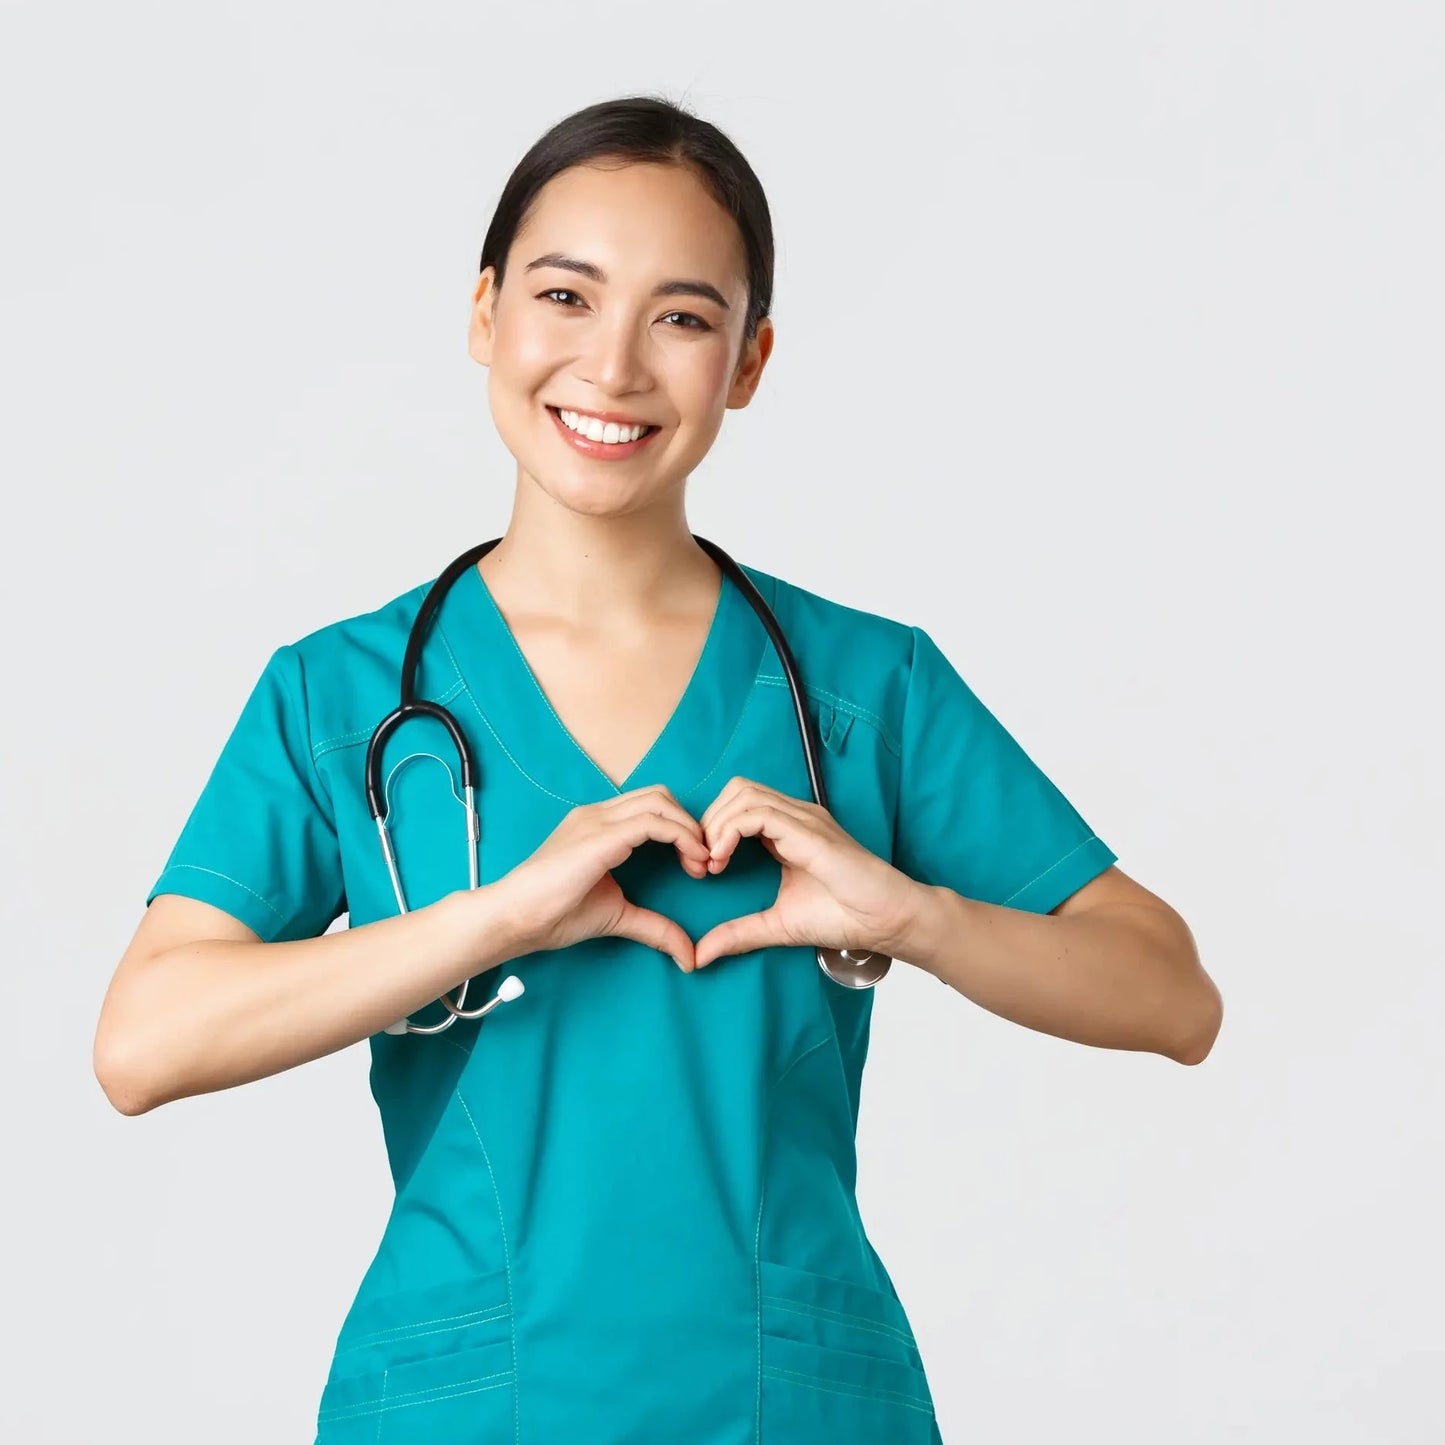 The GUARDIAN ANGEL: Healthcare Professionals & Care givers Health Management